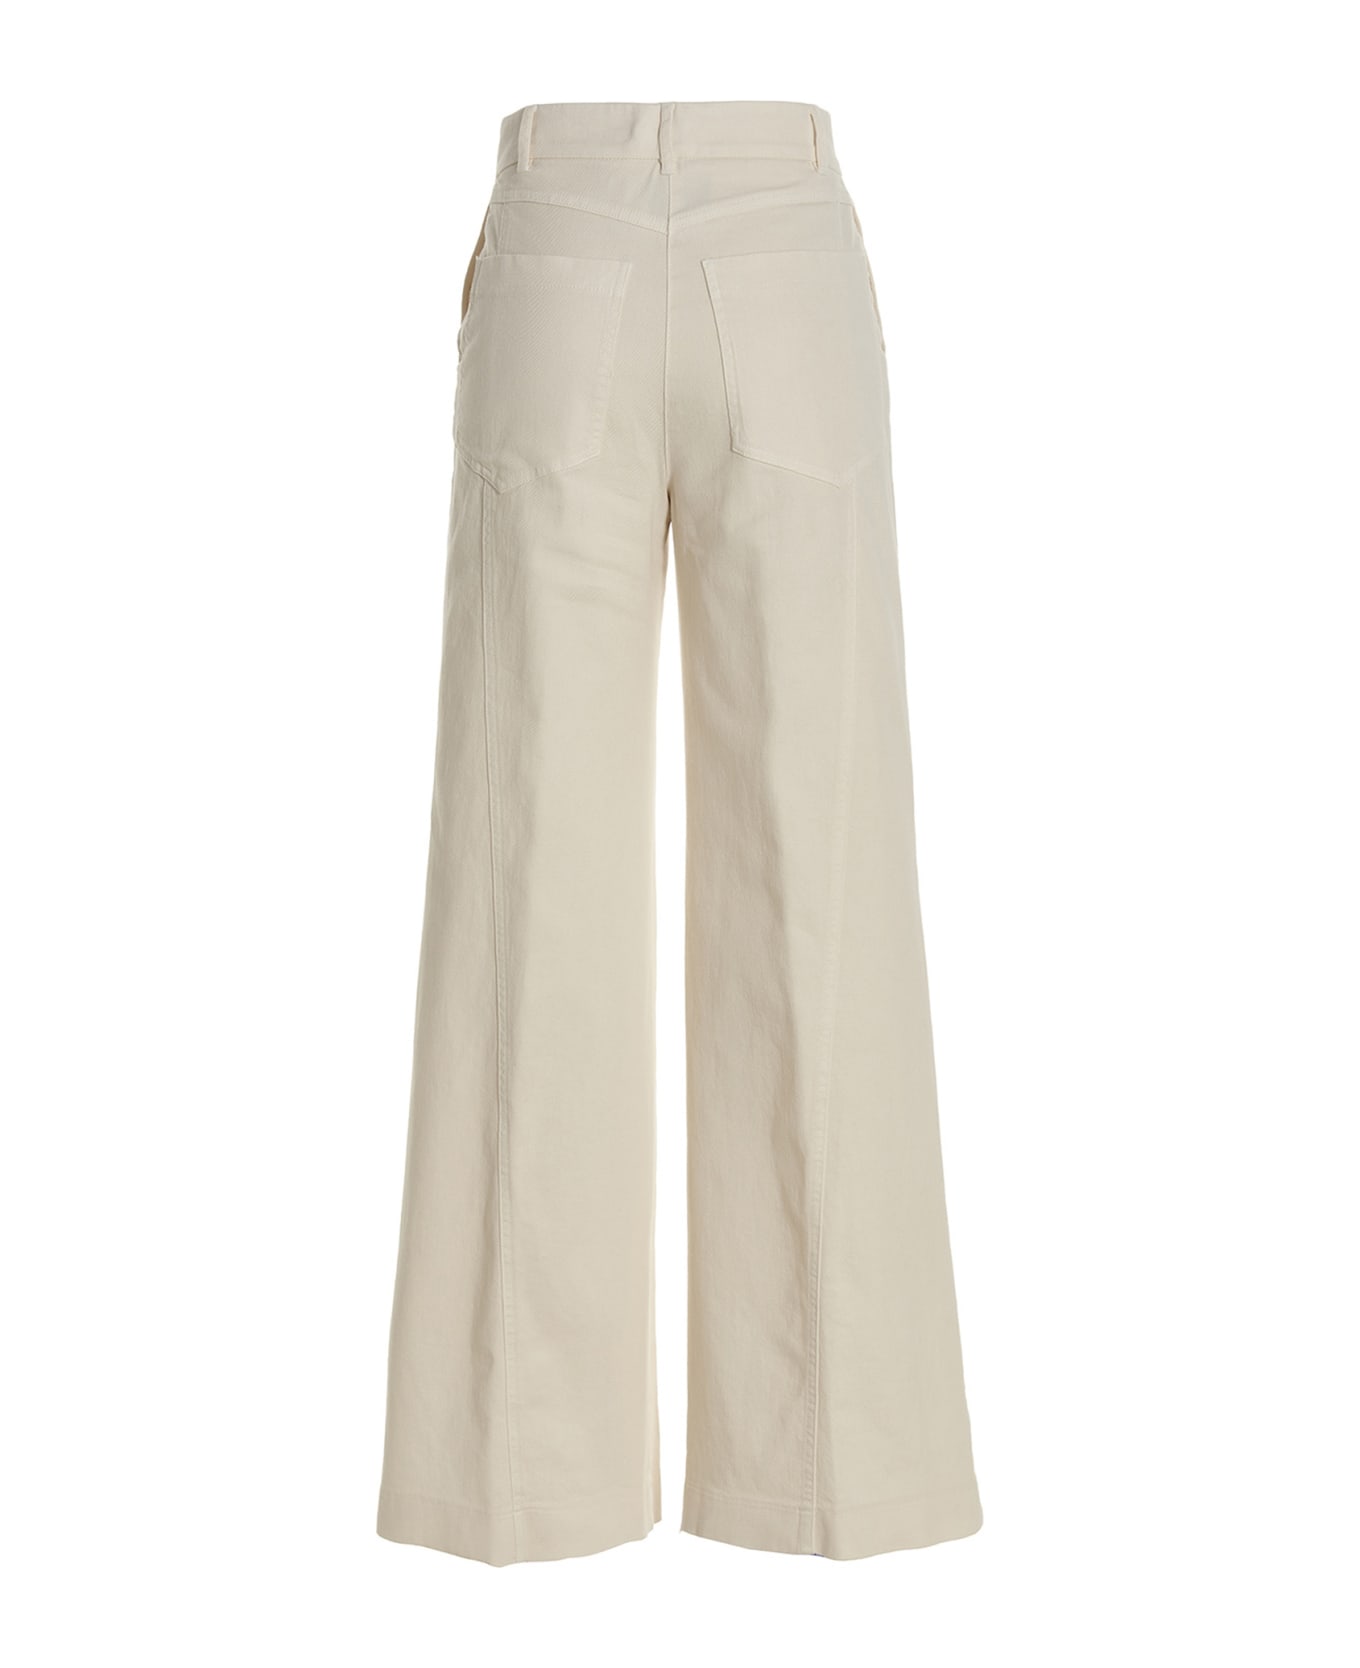 (nude) Wide Leg Jeans - White ボトムス